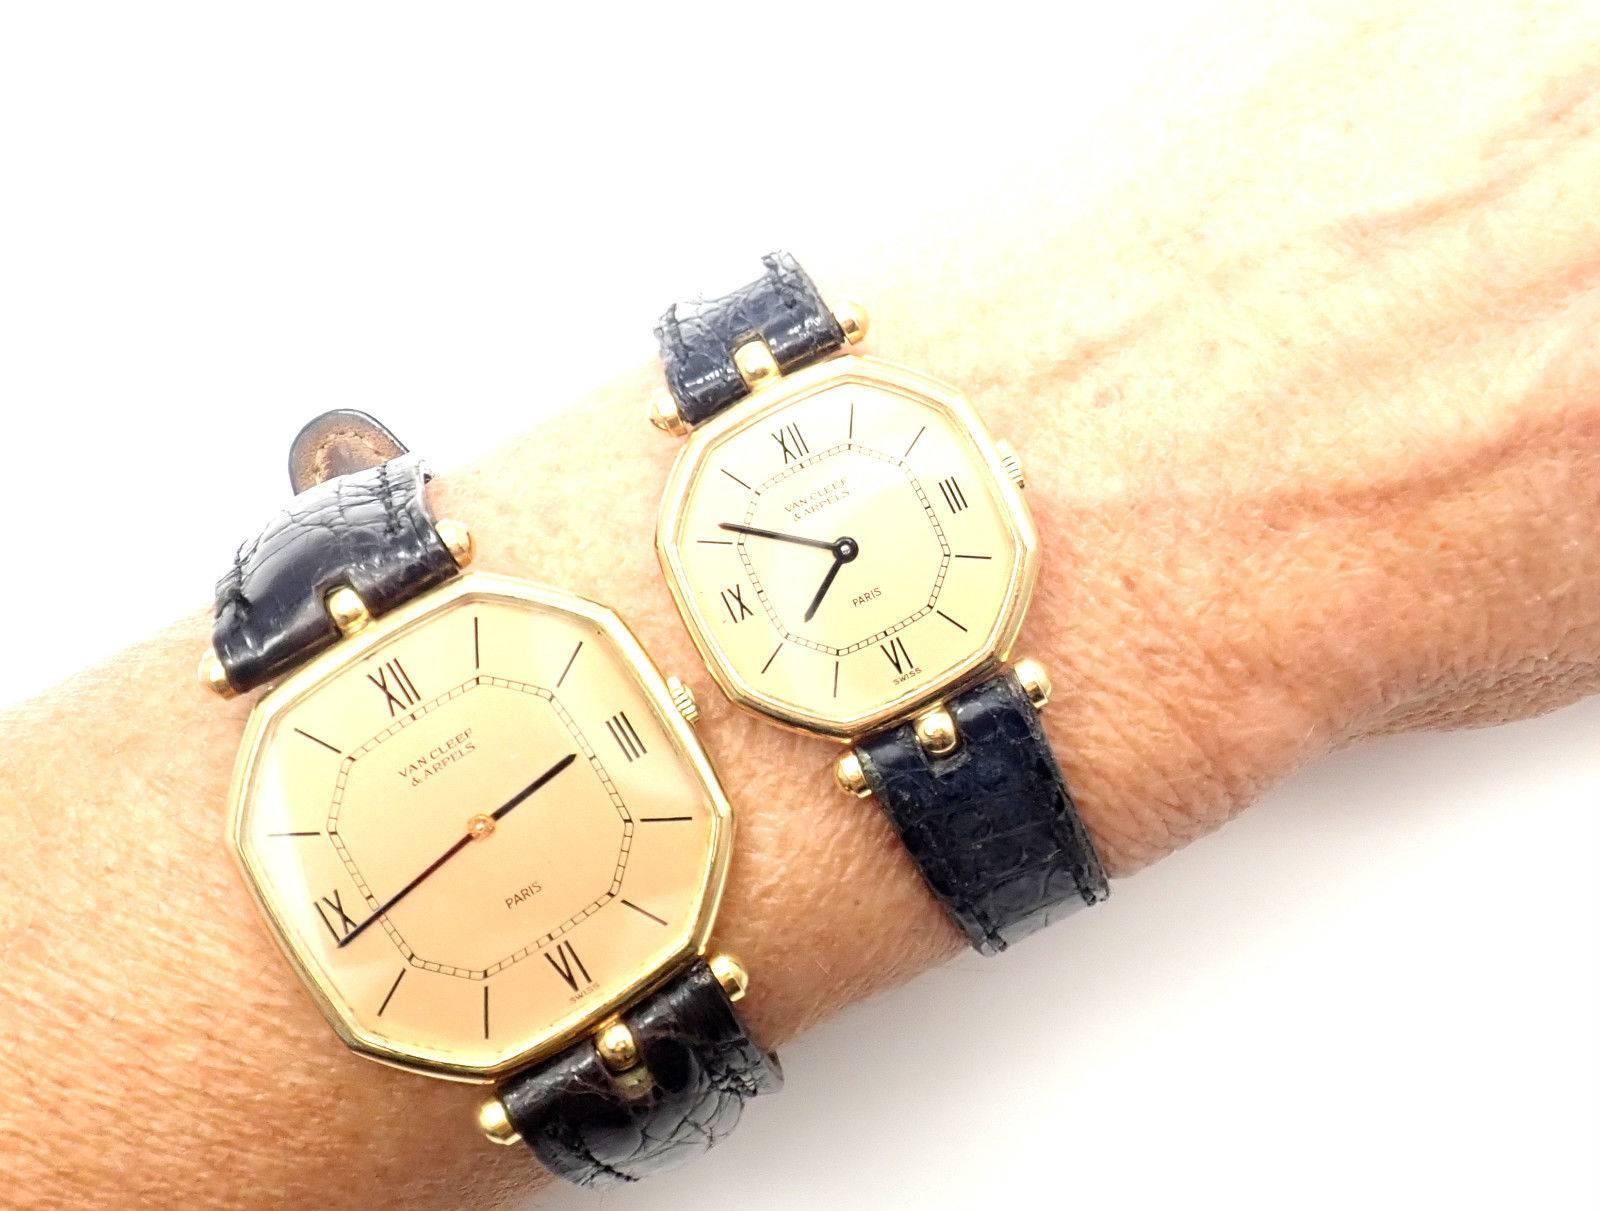 Van Cleef & Arpels Jaeger Lecoultre His And Hers  Set  Gold Wristwatches 4